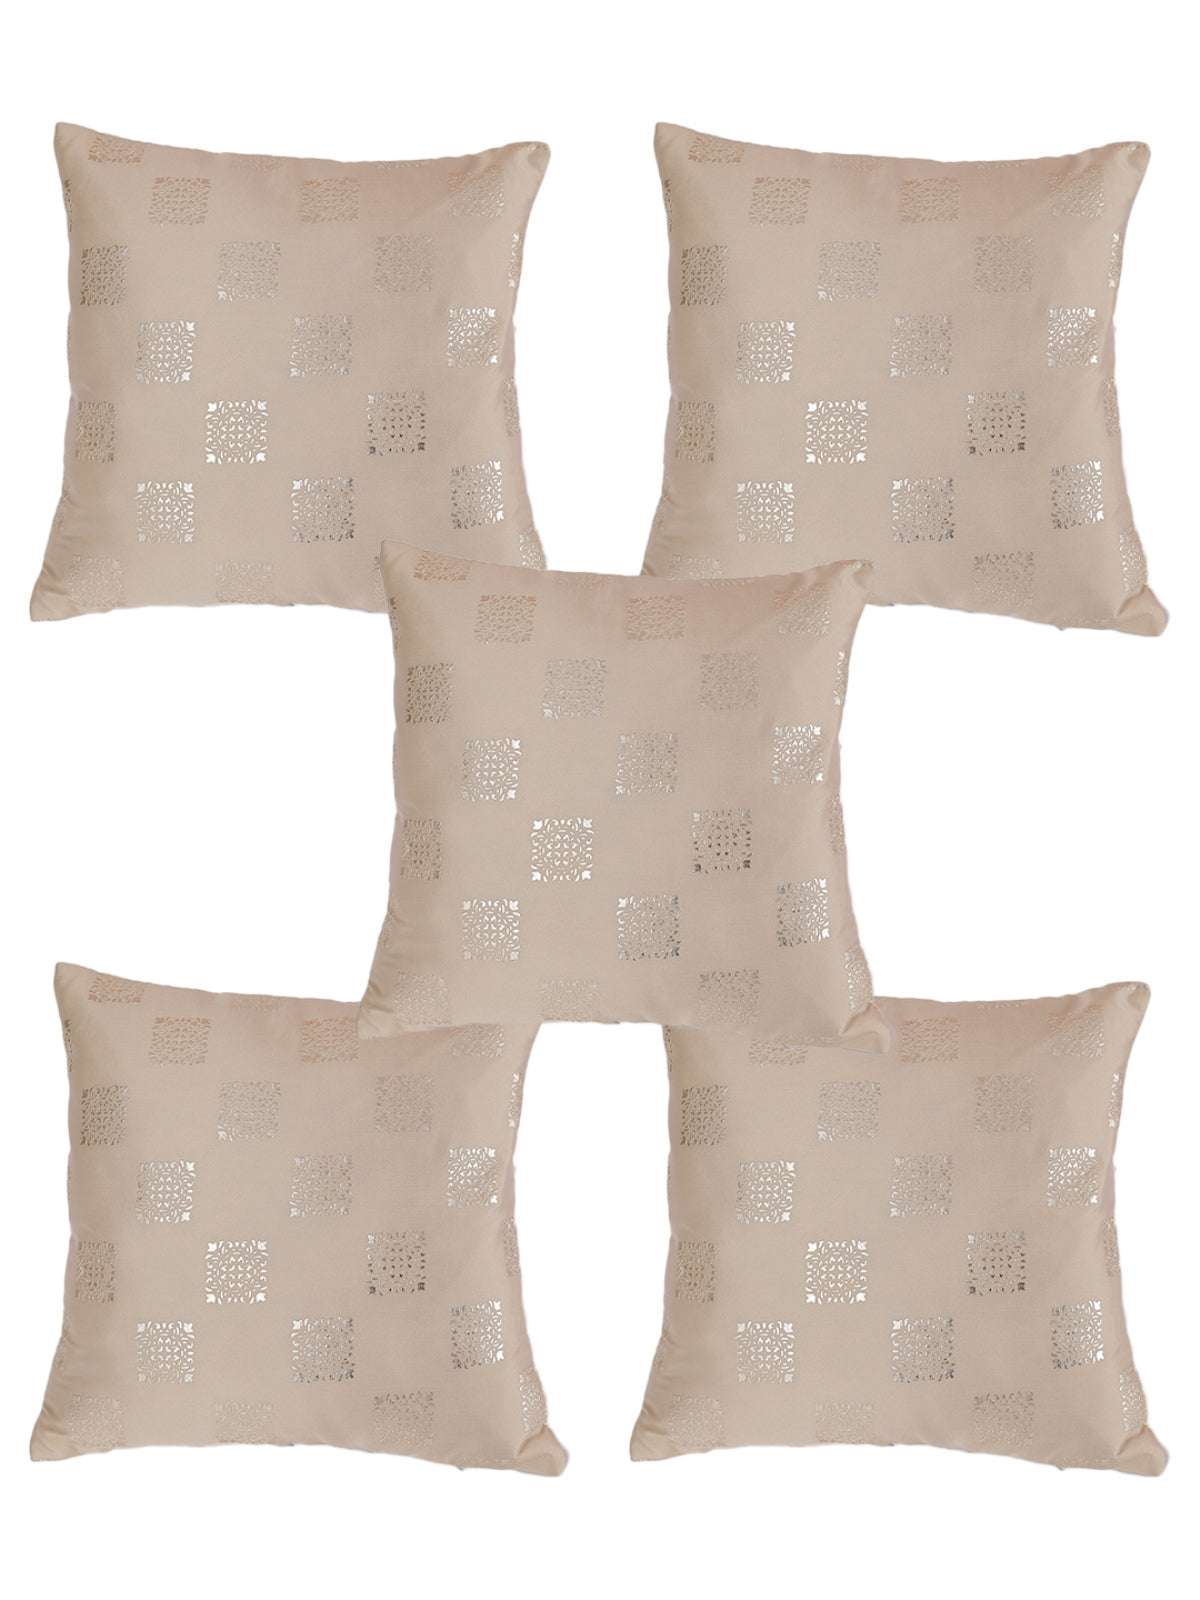 Beige Set of 5 Polyester 16 Inch x 16 Inch Cushion Covers